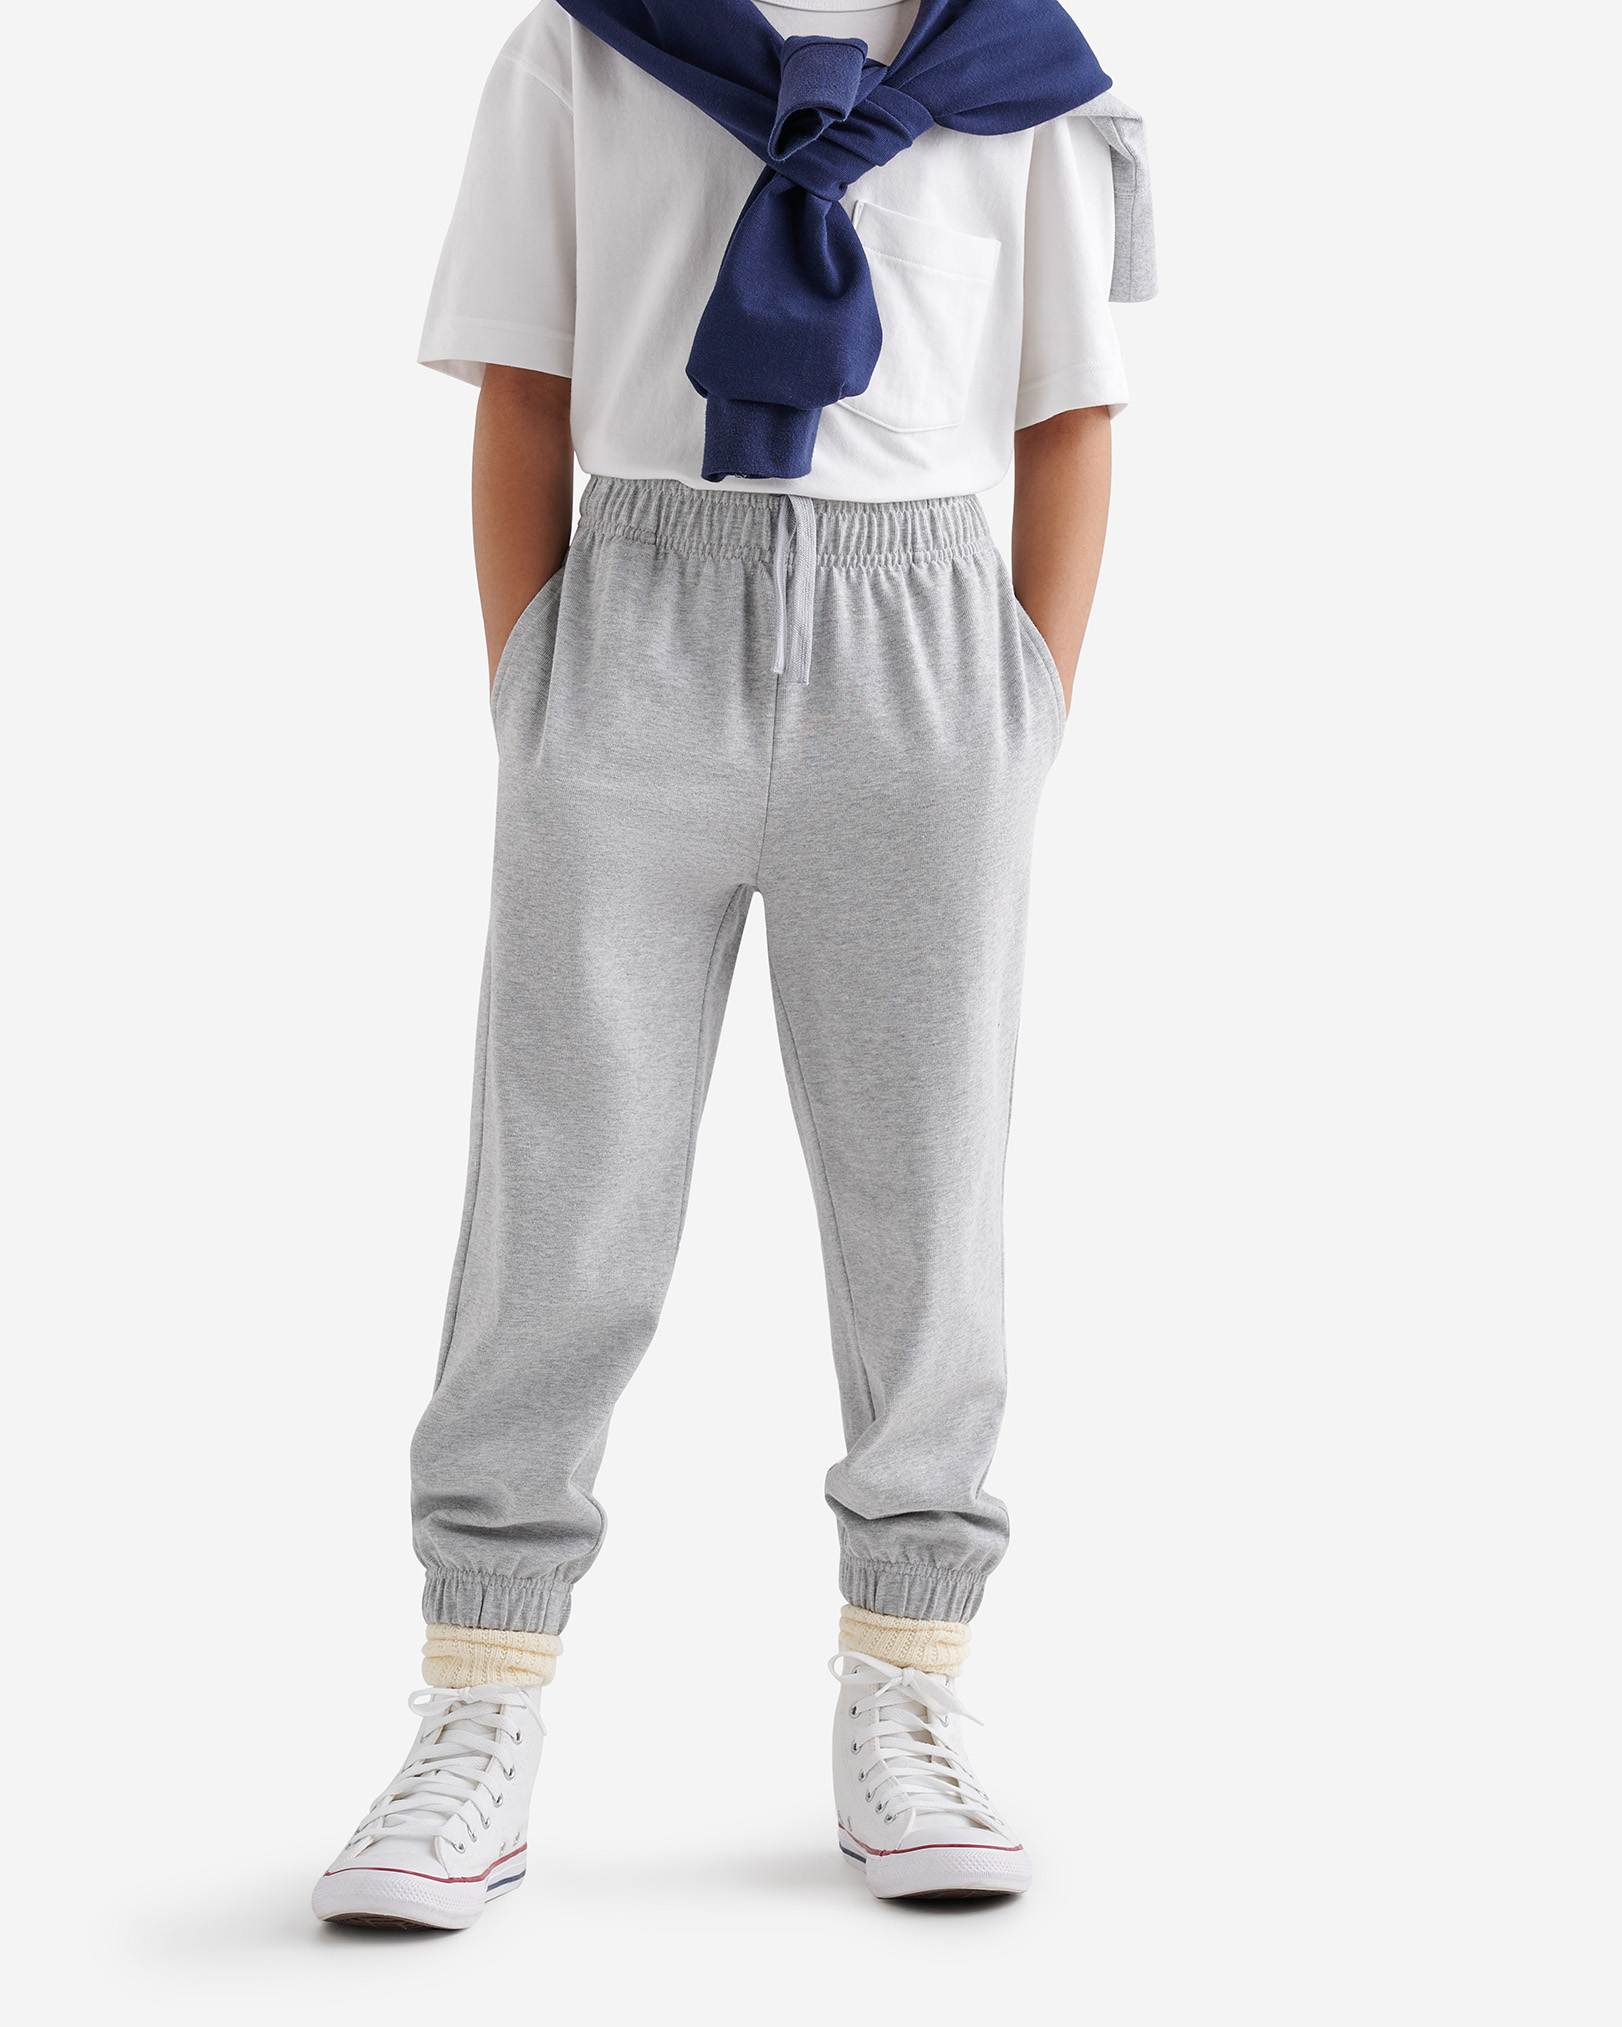 Roots Kids Warm-Up Pant in Heather Grey